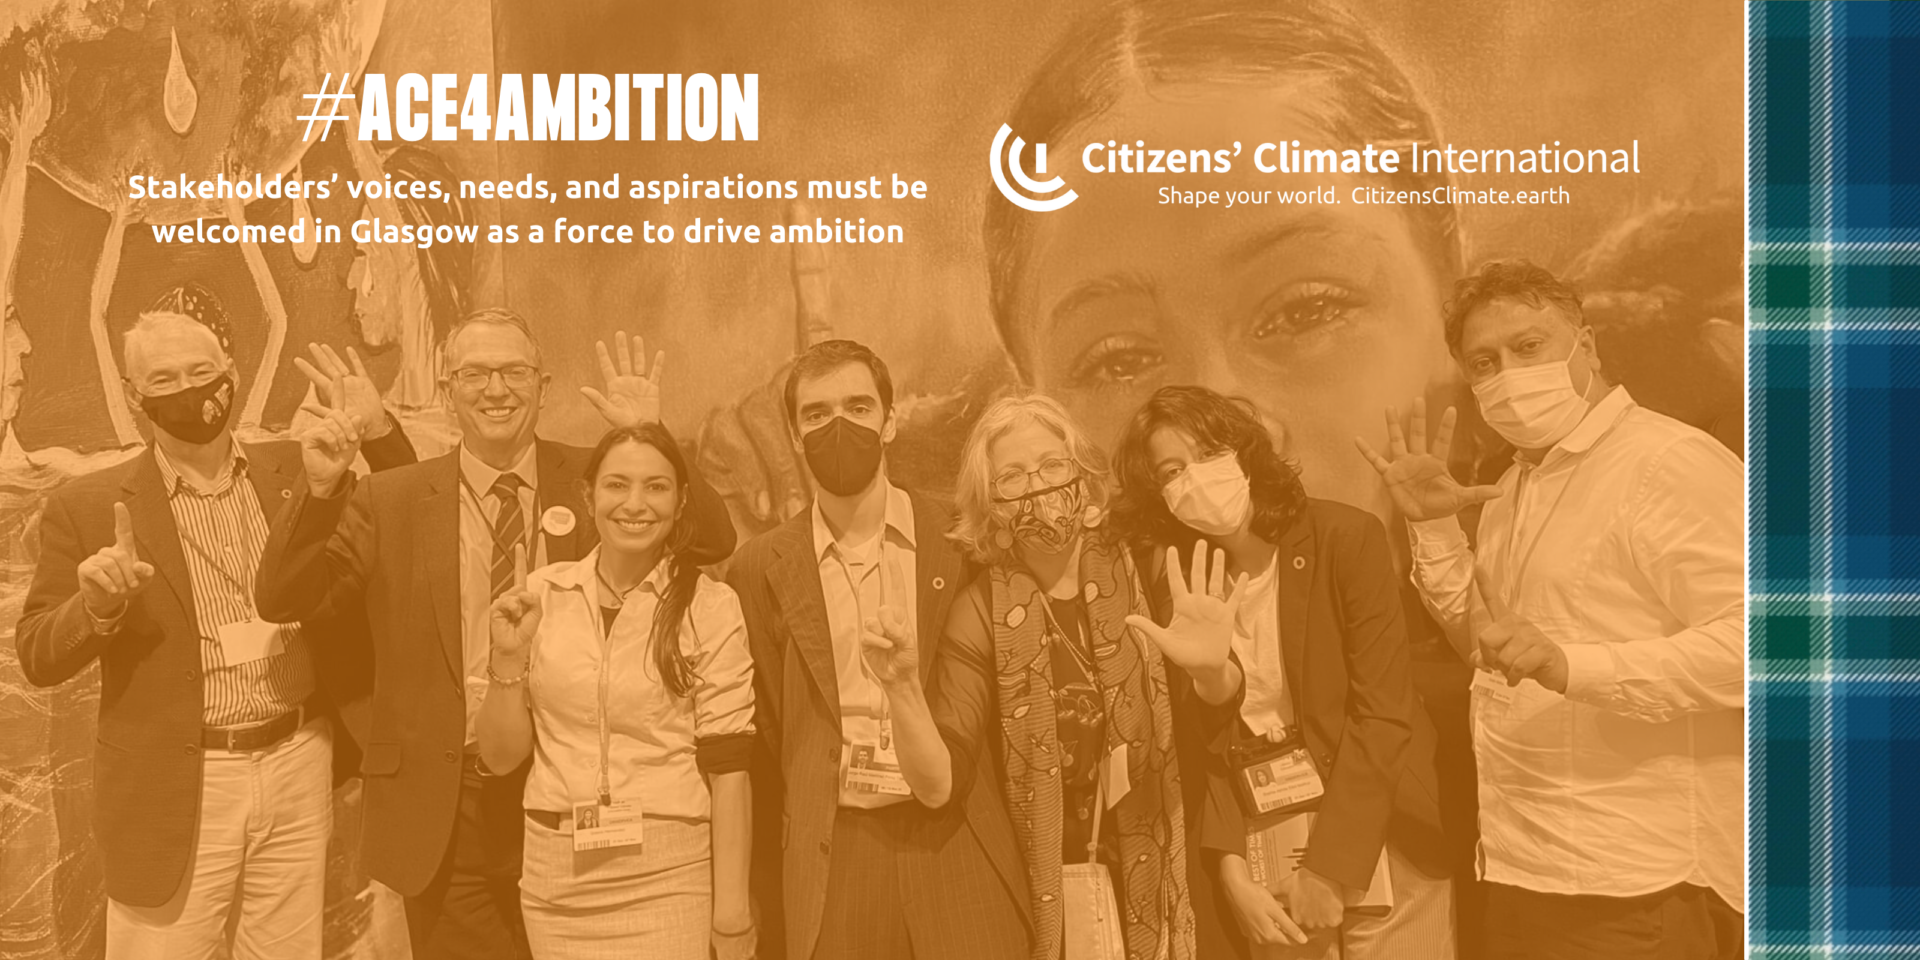 Informed participation is an engine of climate progress & future prosperity